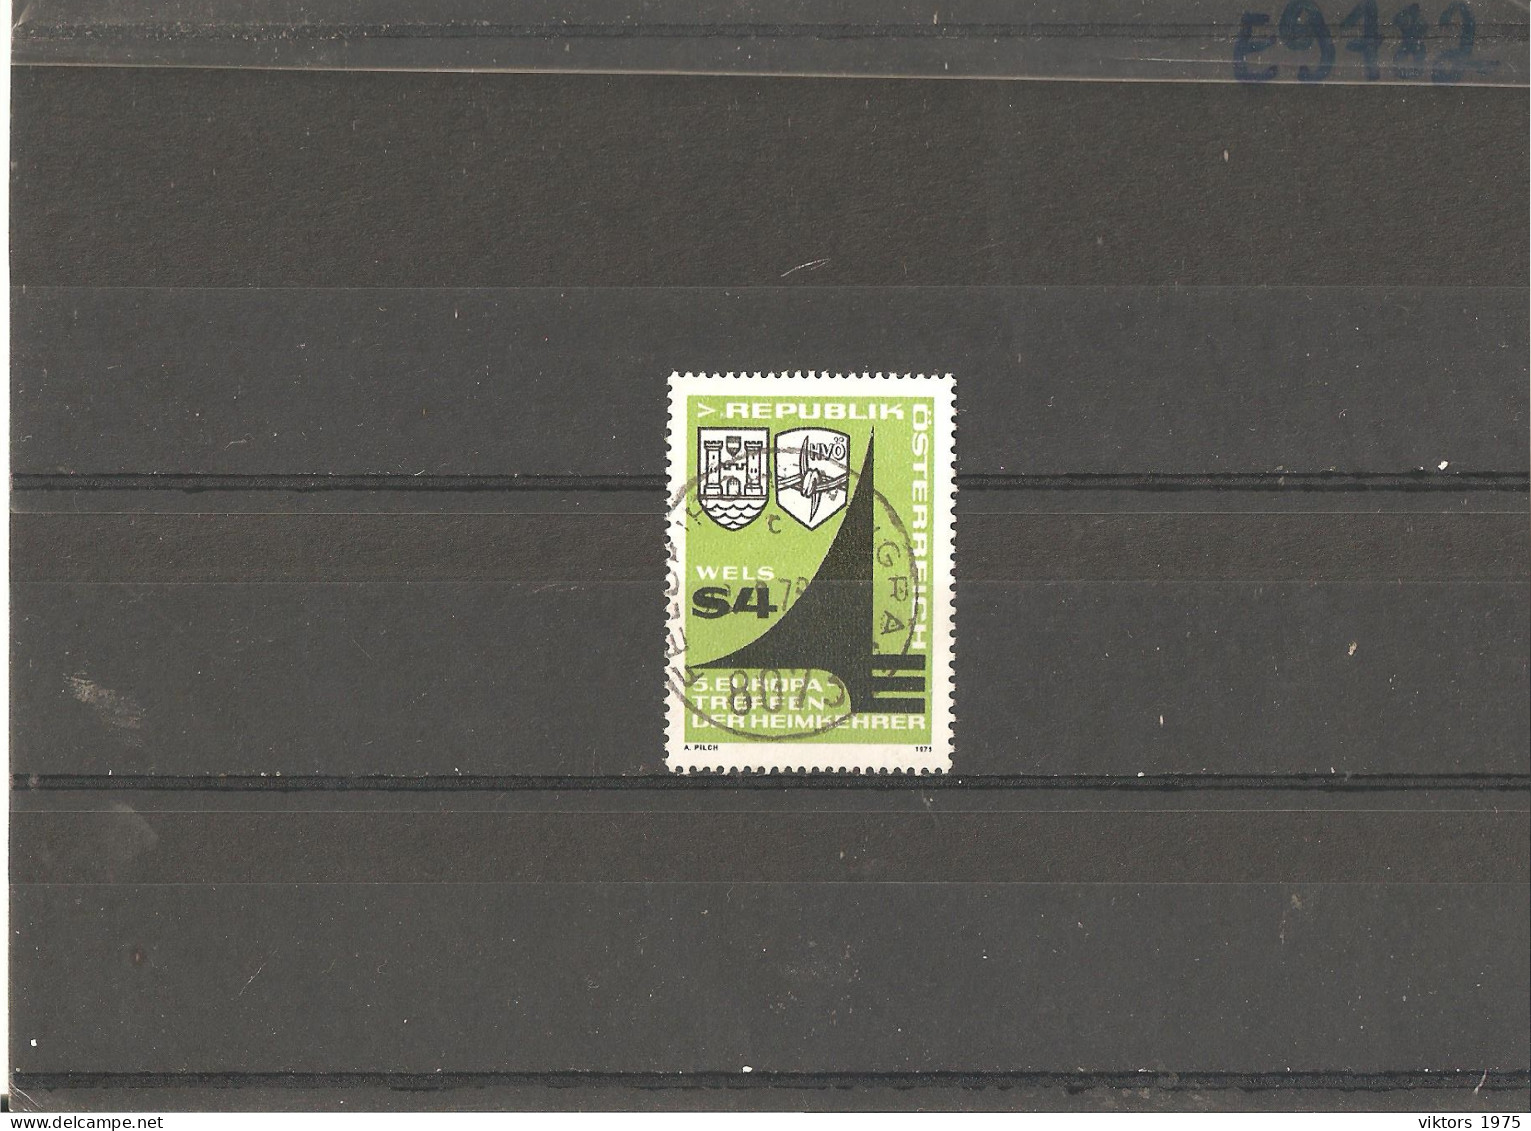 Used Stamp Nr.1615 In MICHEL Catalog - Used Stamps